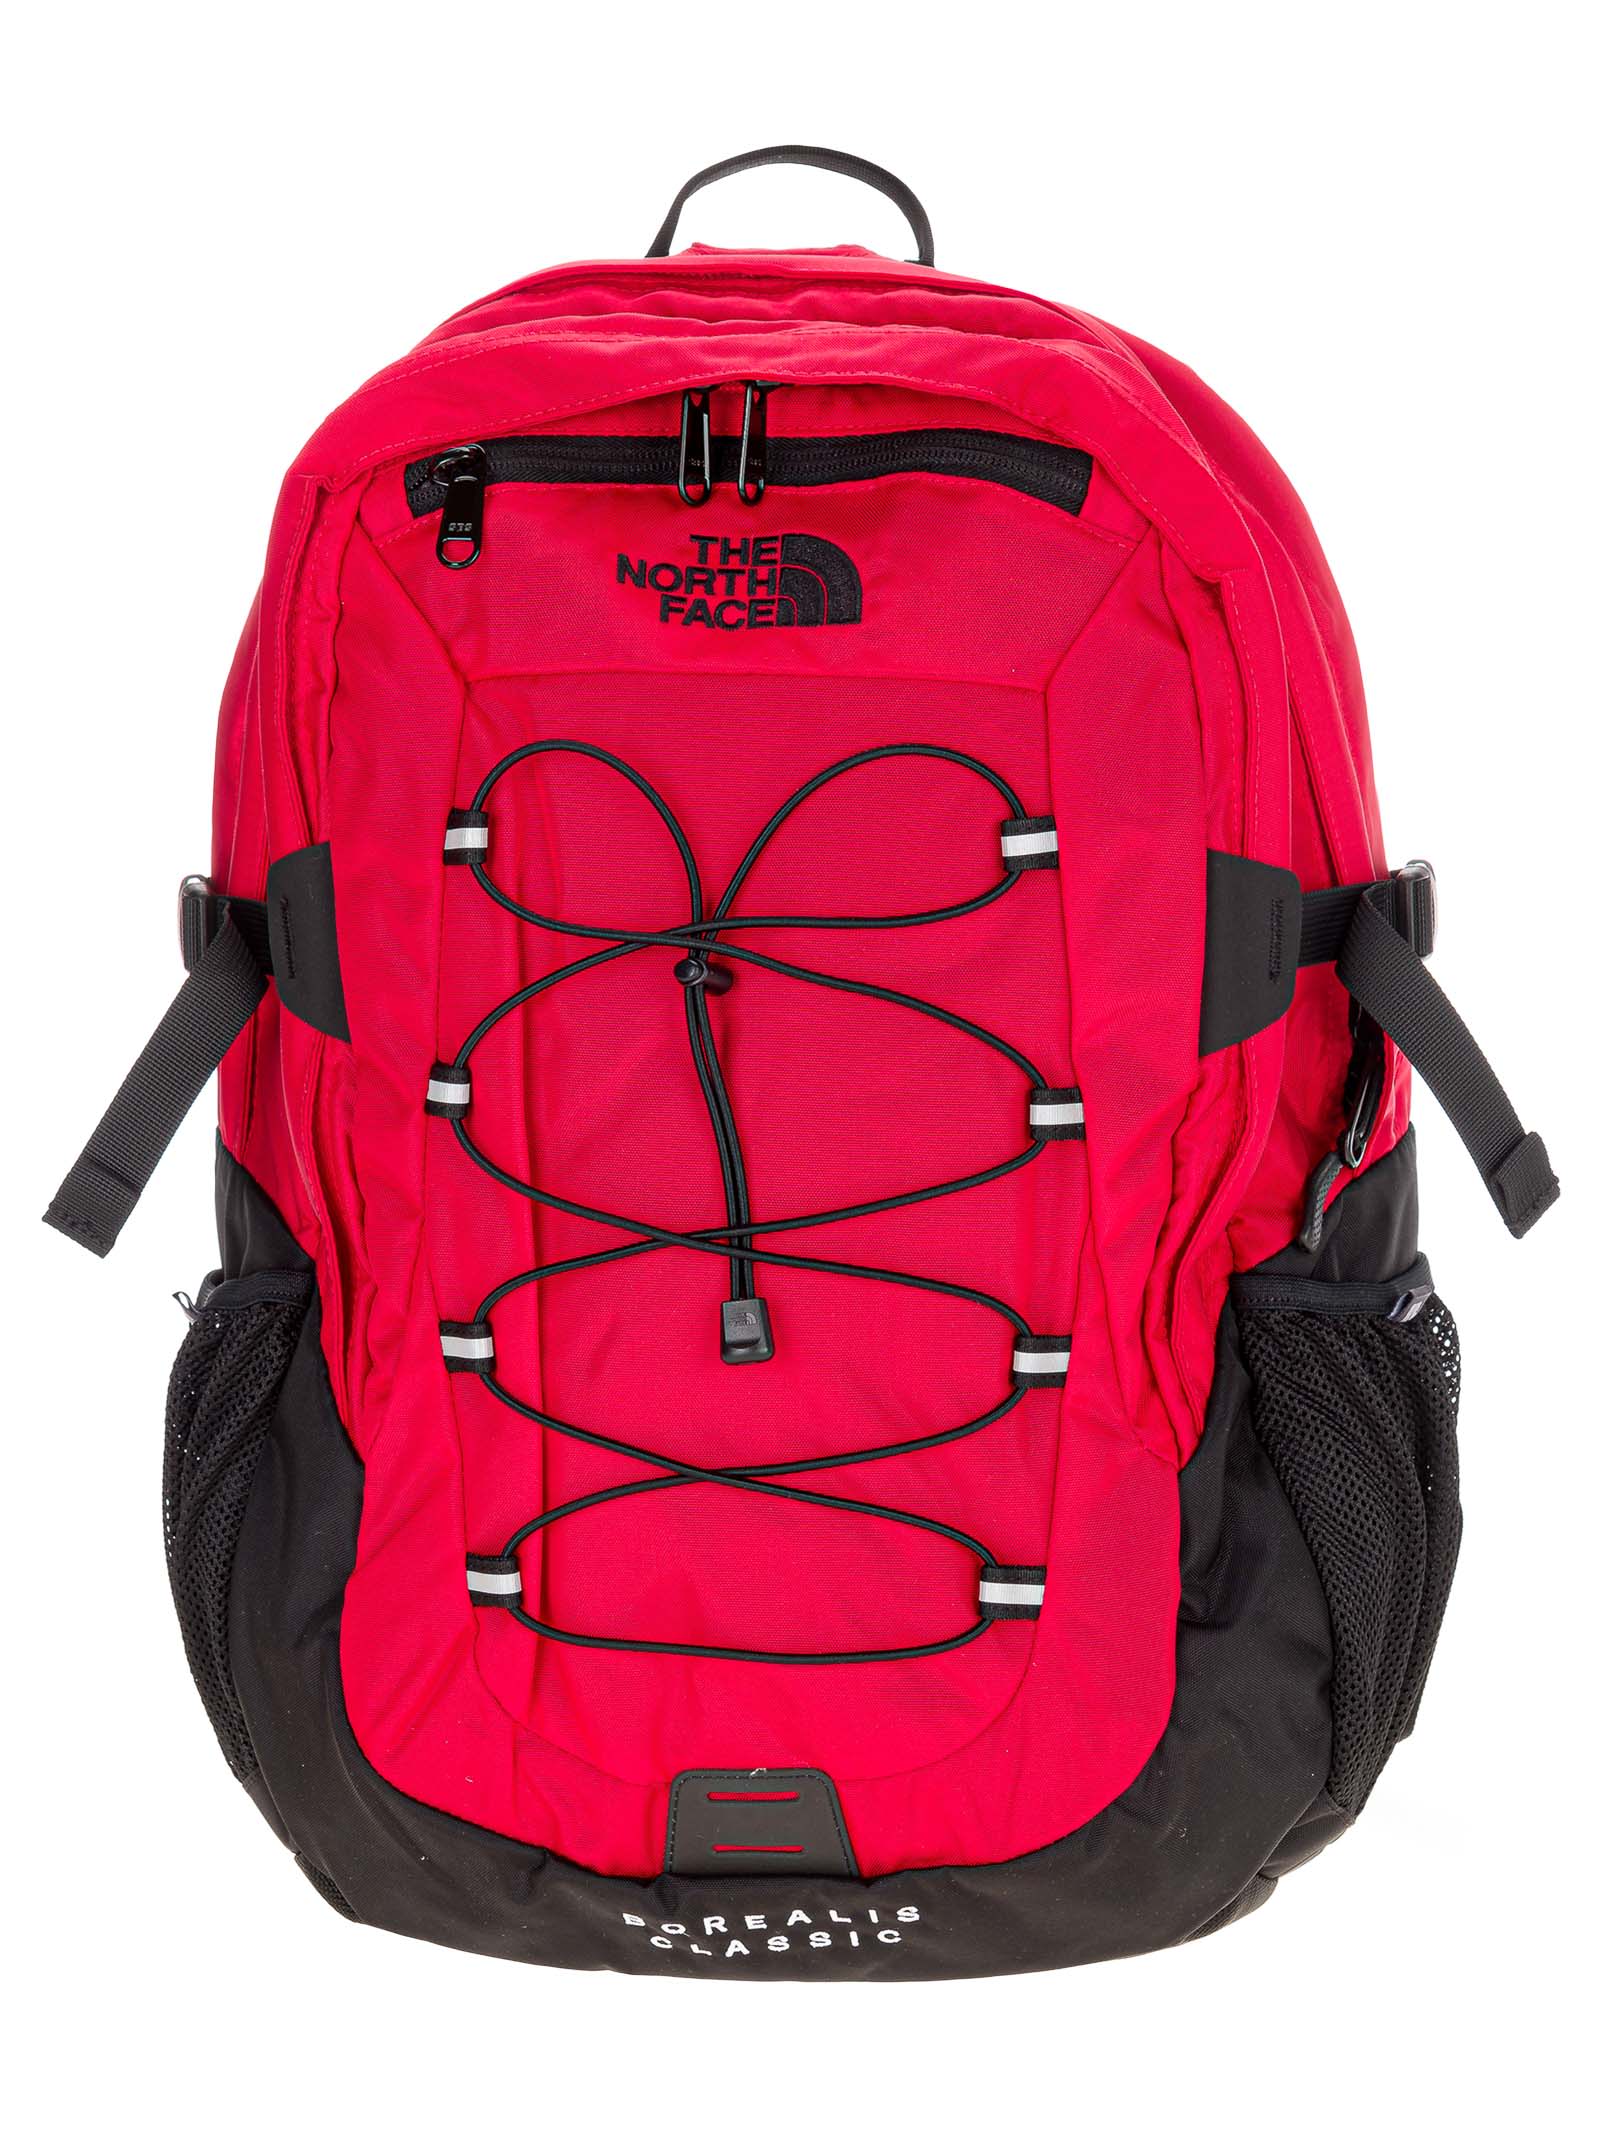 The North Face North Face Borealis Backpack